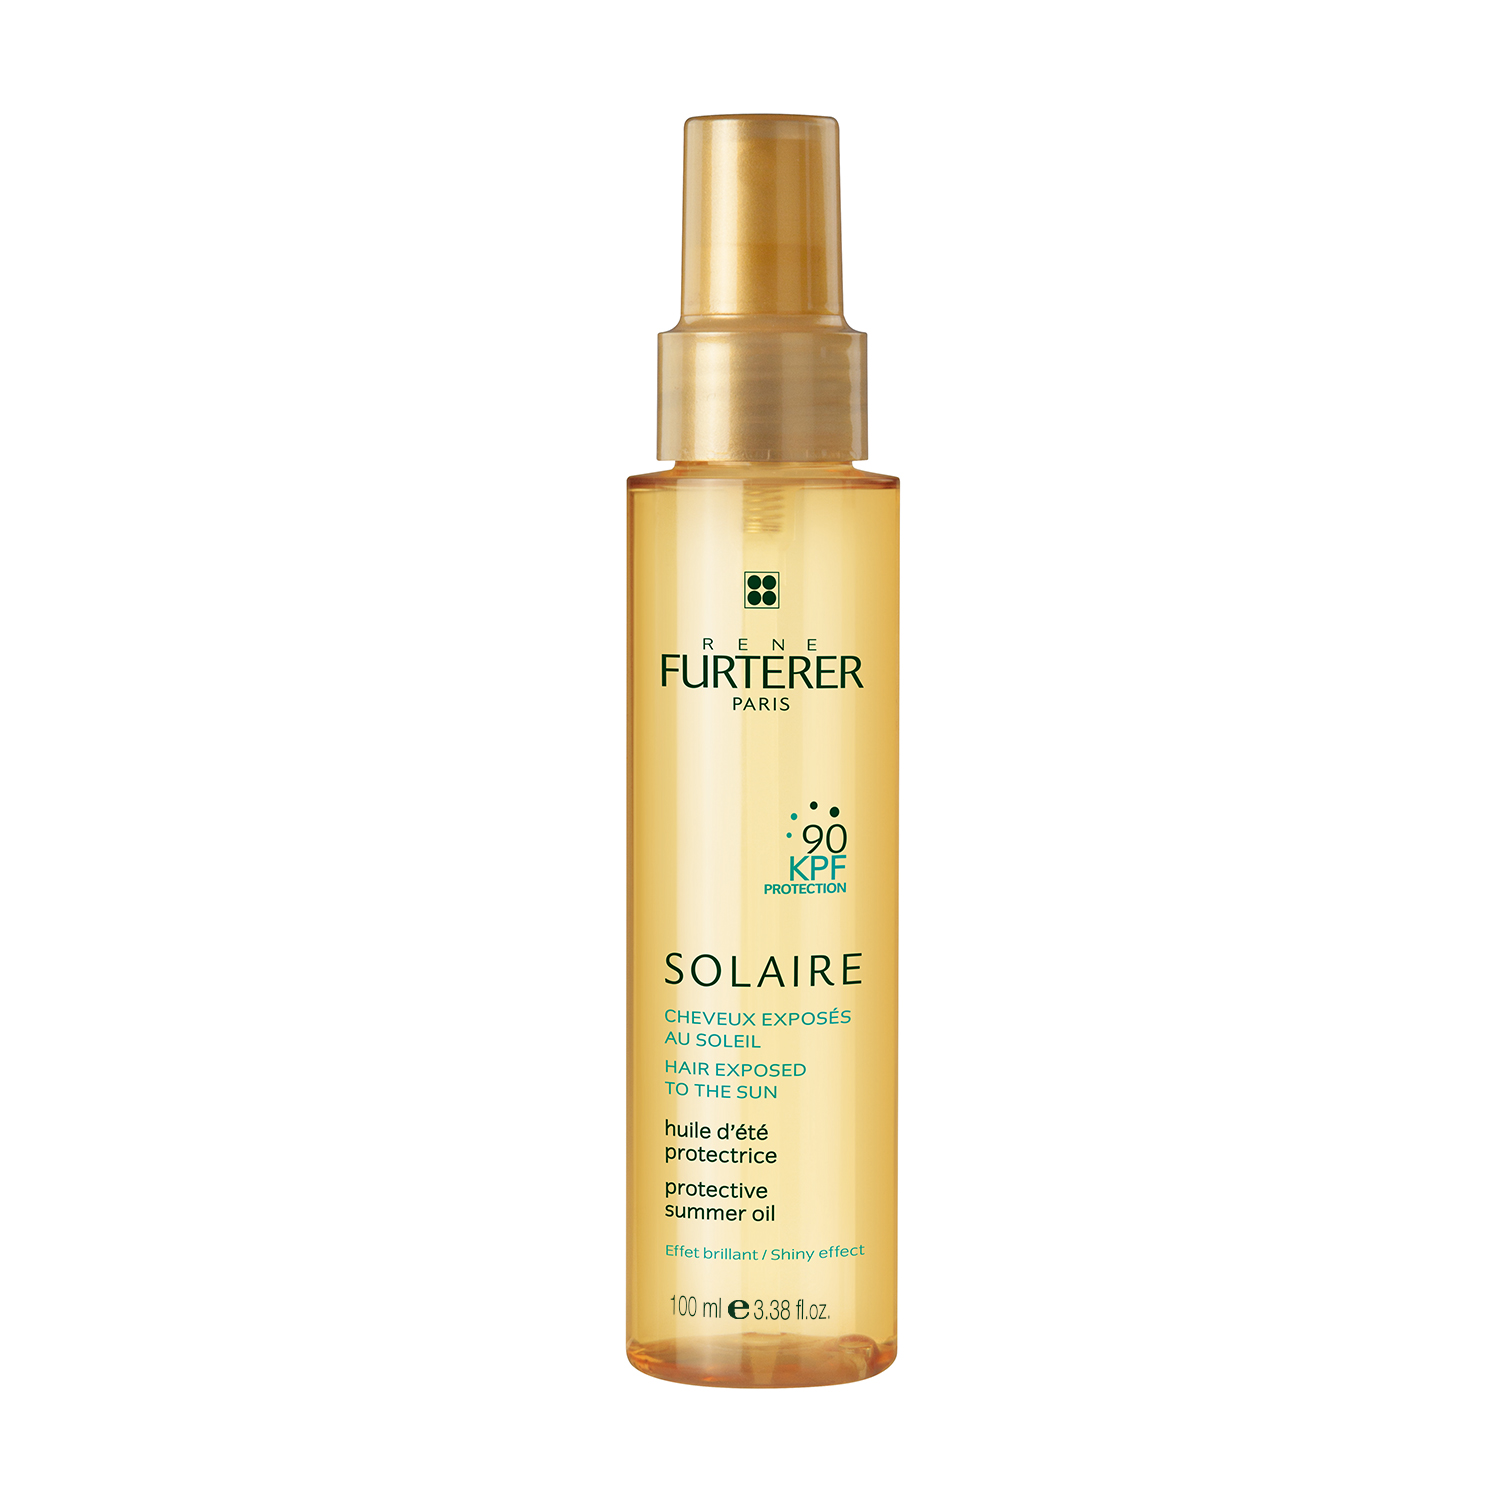 xịt tóc chống nắng René Furterer Solaire Protective Summer Oil